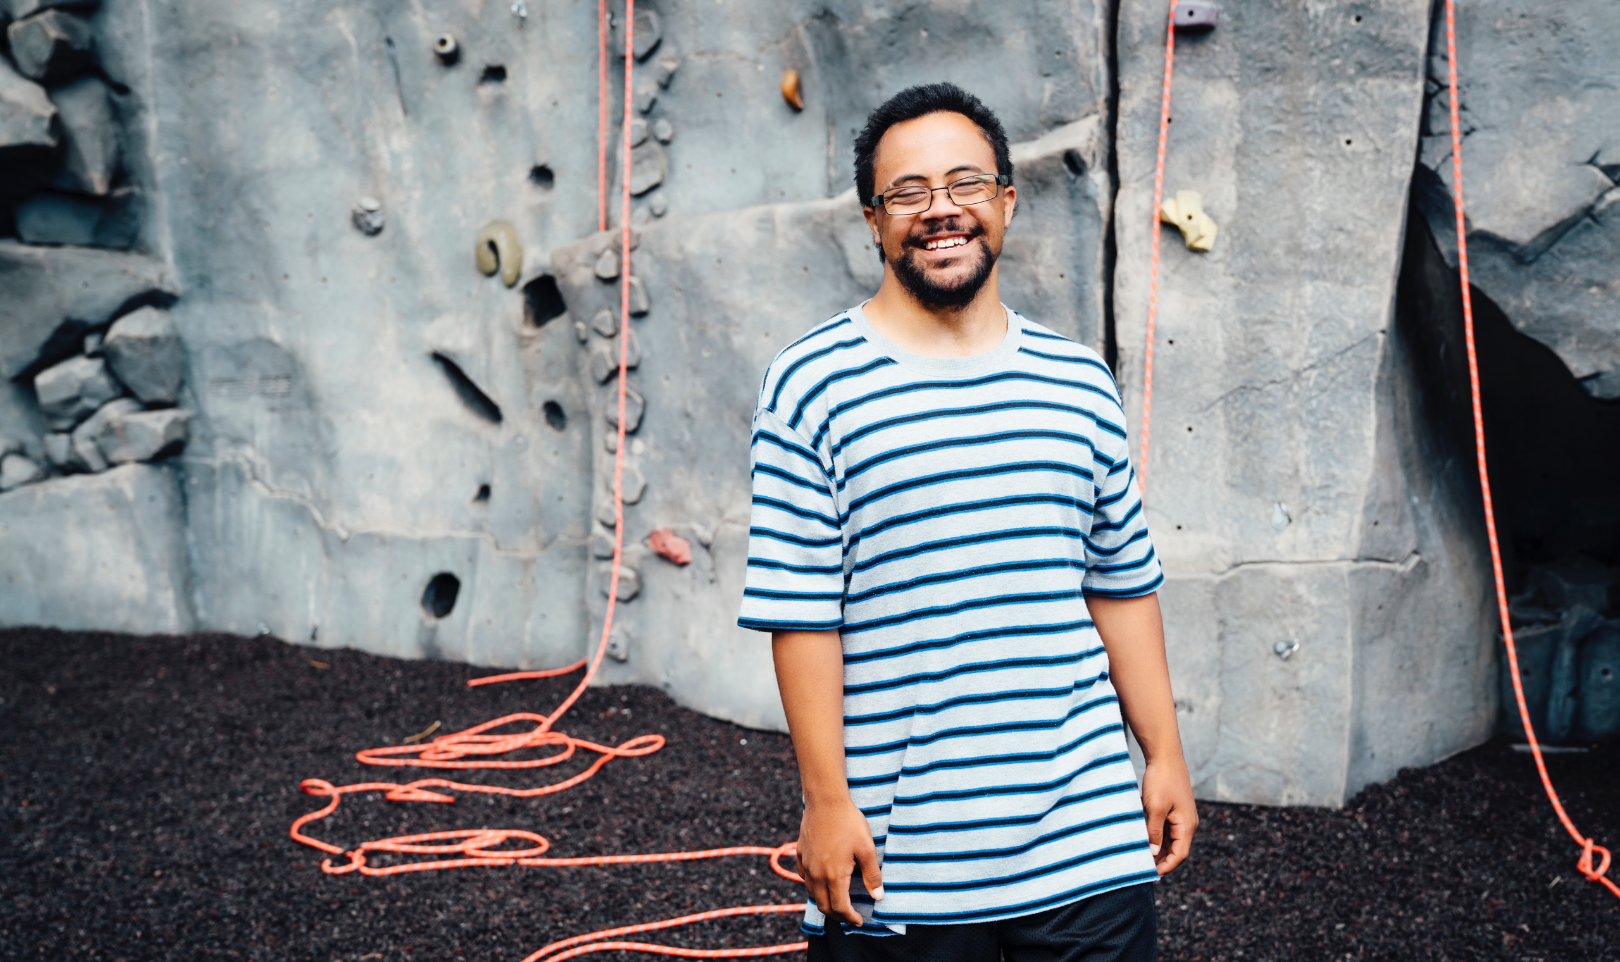 Man standing in front of rock climbing wall smiling